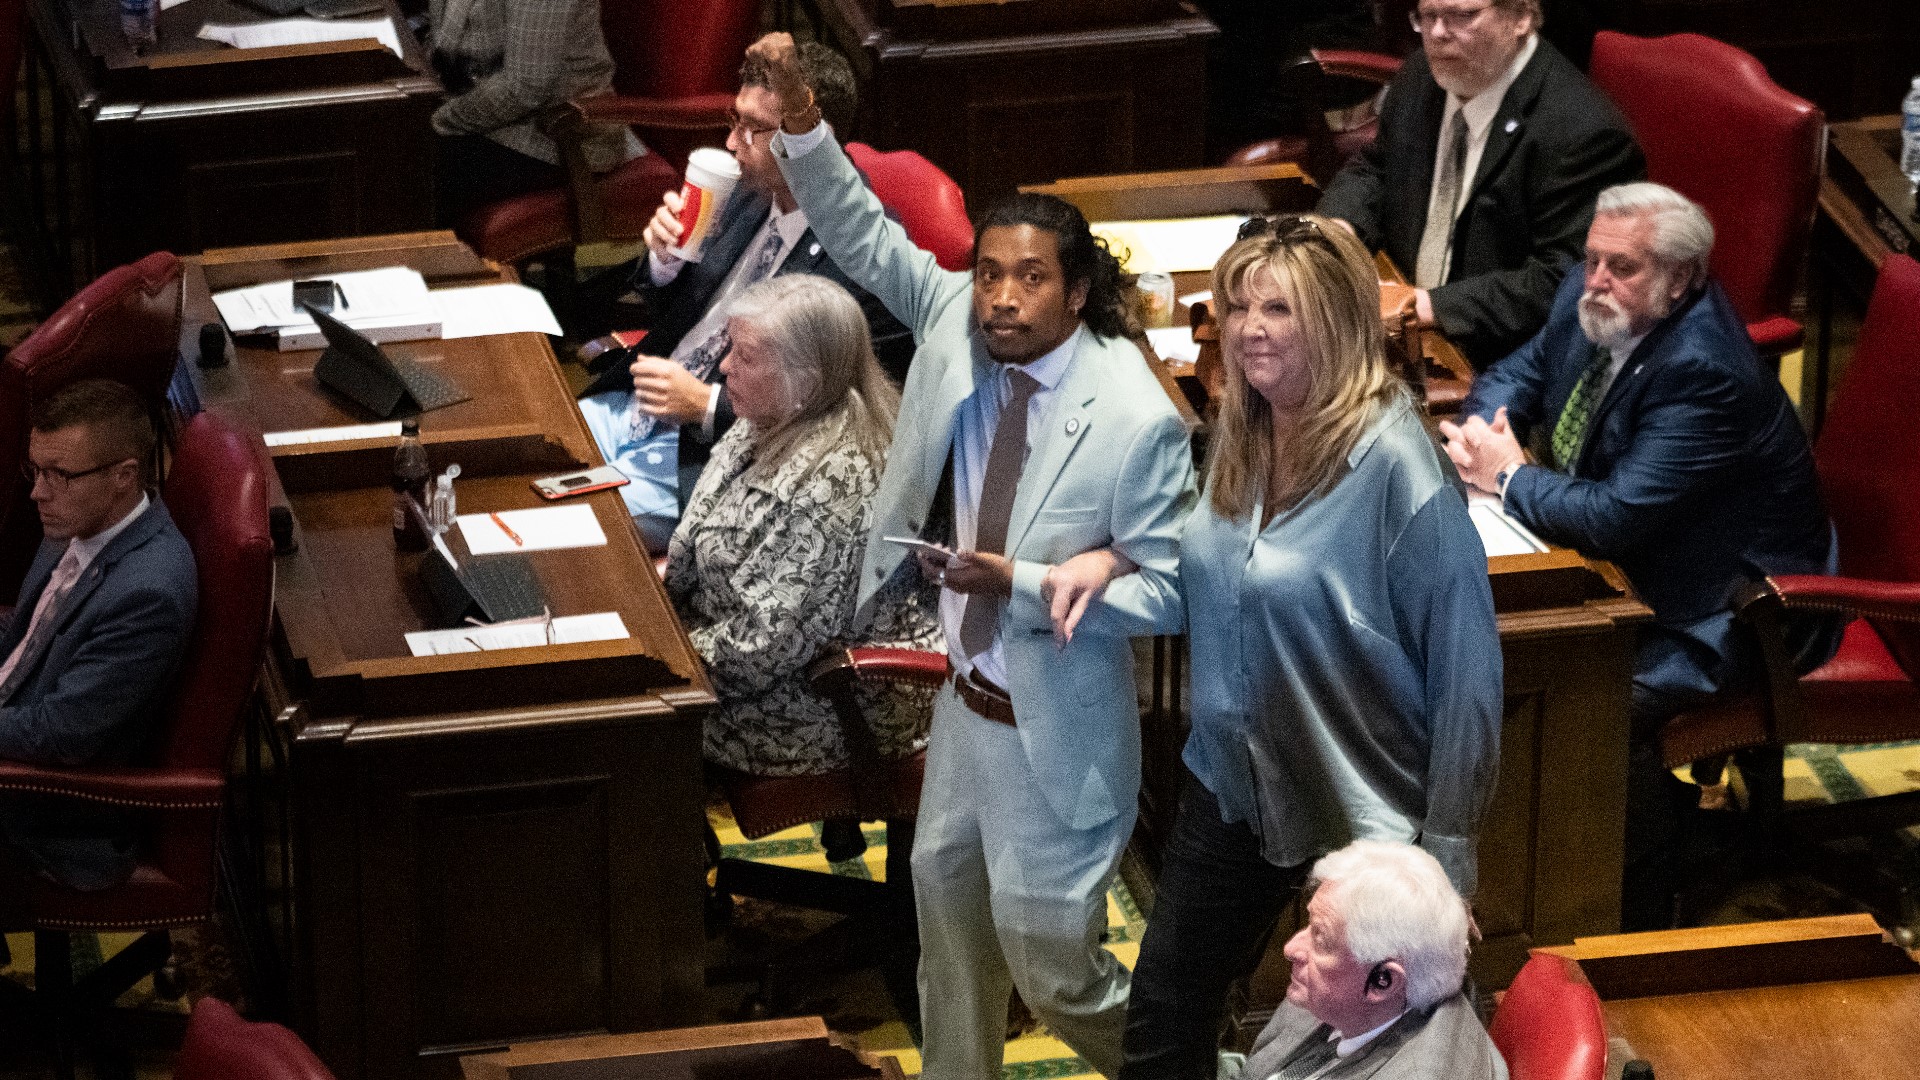 The Nashville Metro Council voted Monday evening to reinstate Rep. Justin Jones as its interim representative days after House Republicans voted to expel him.